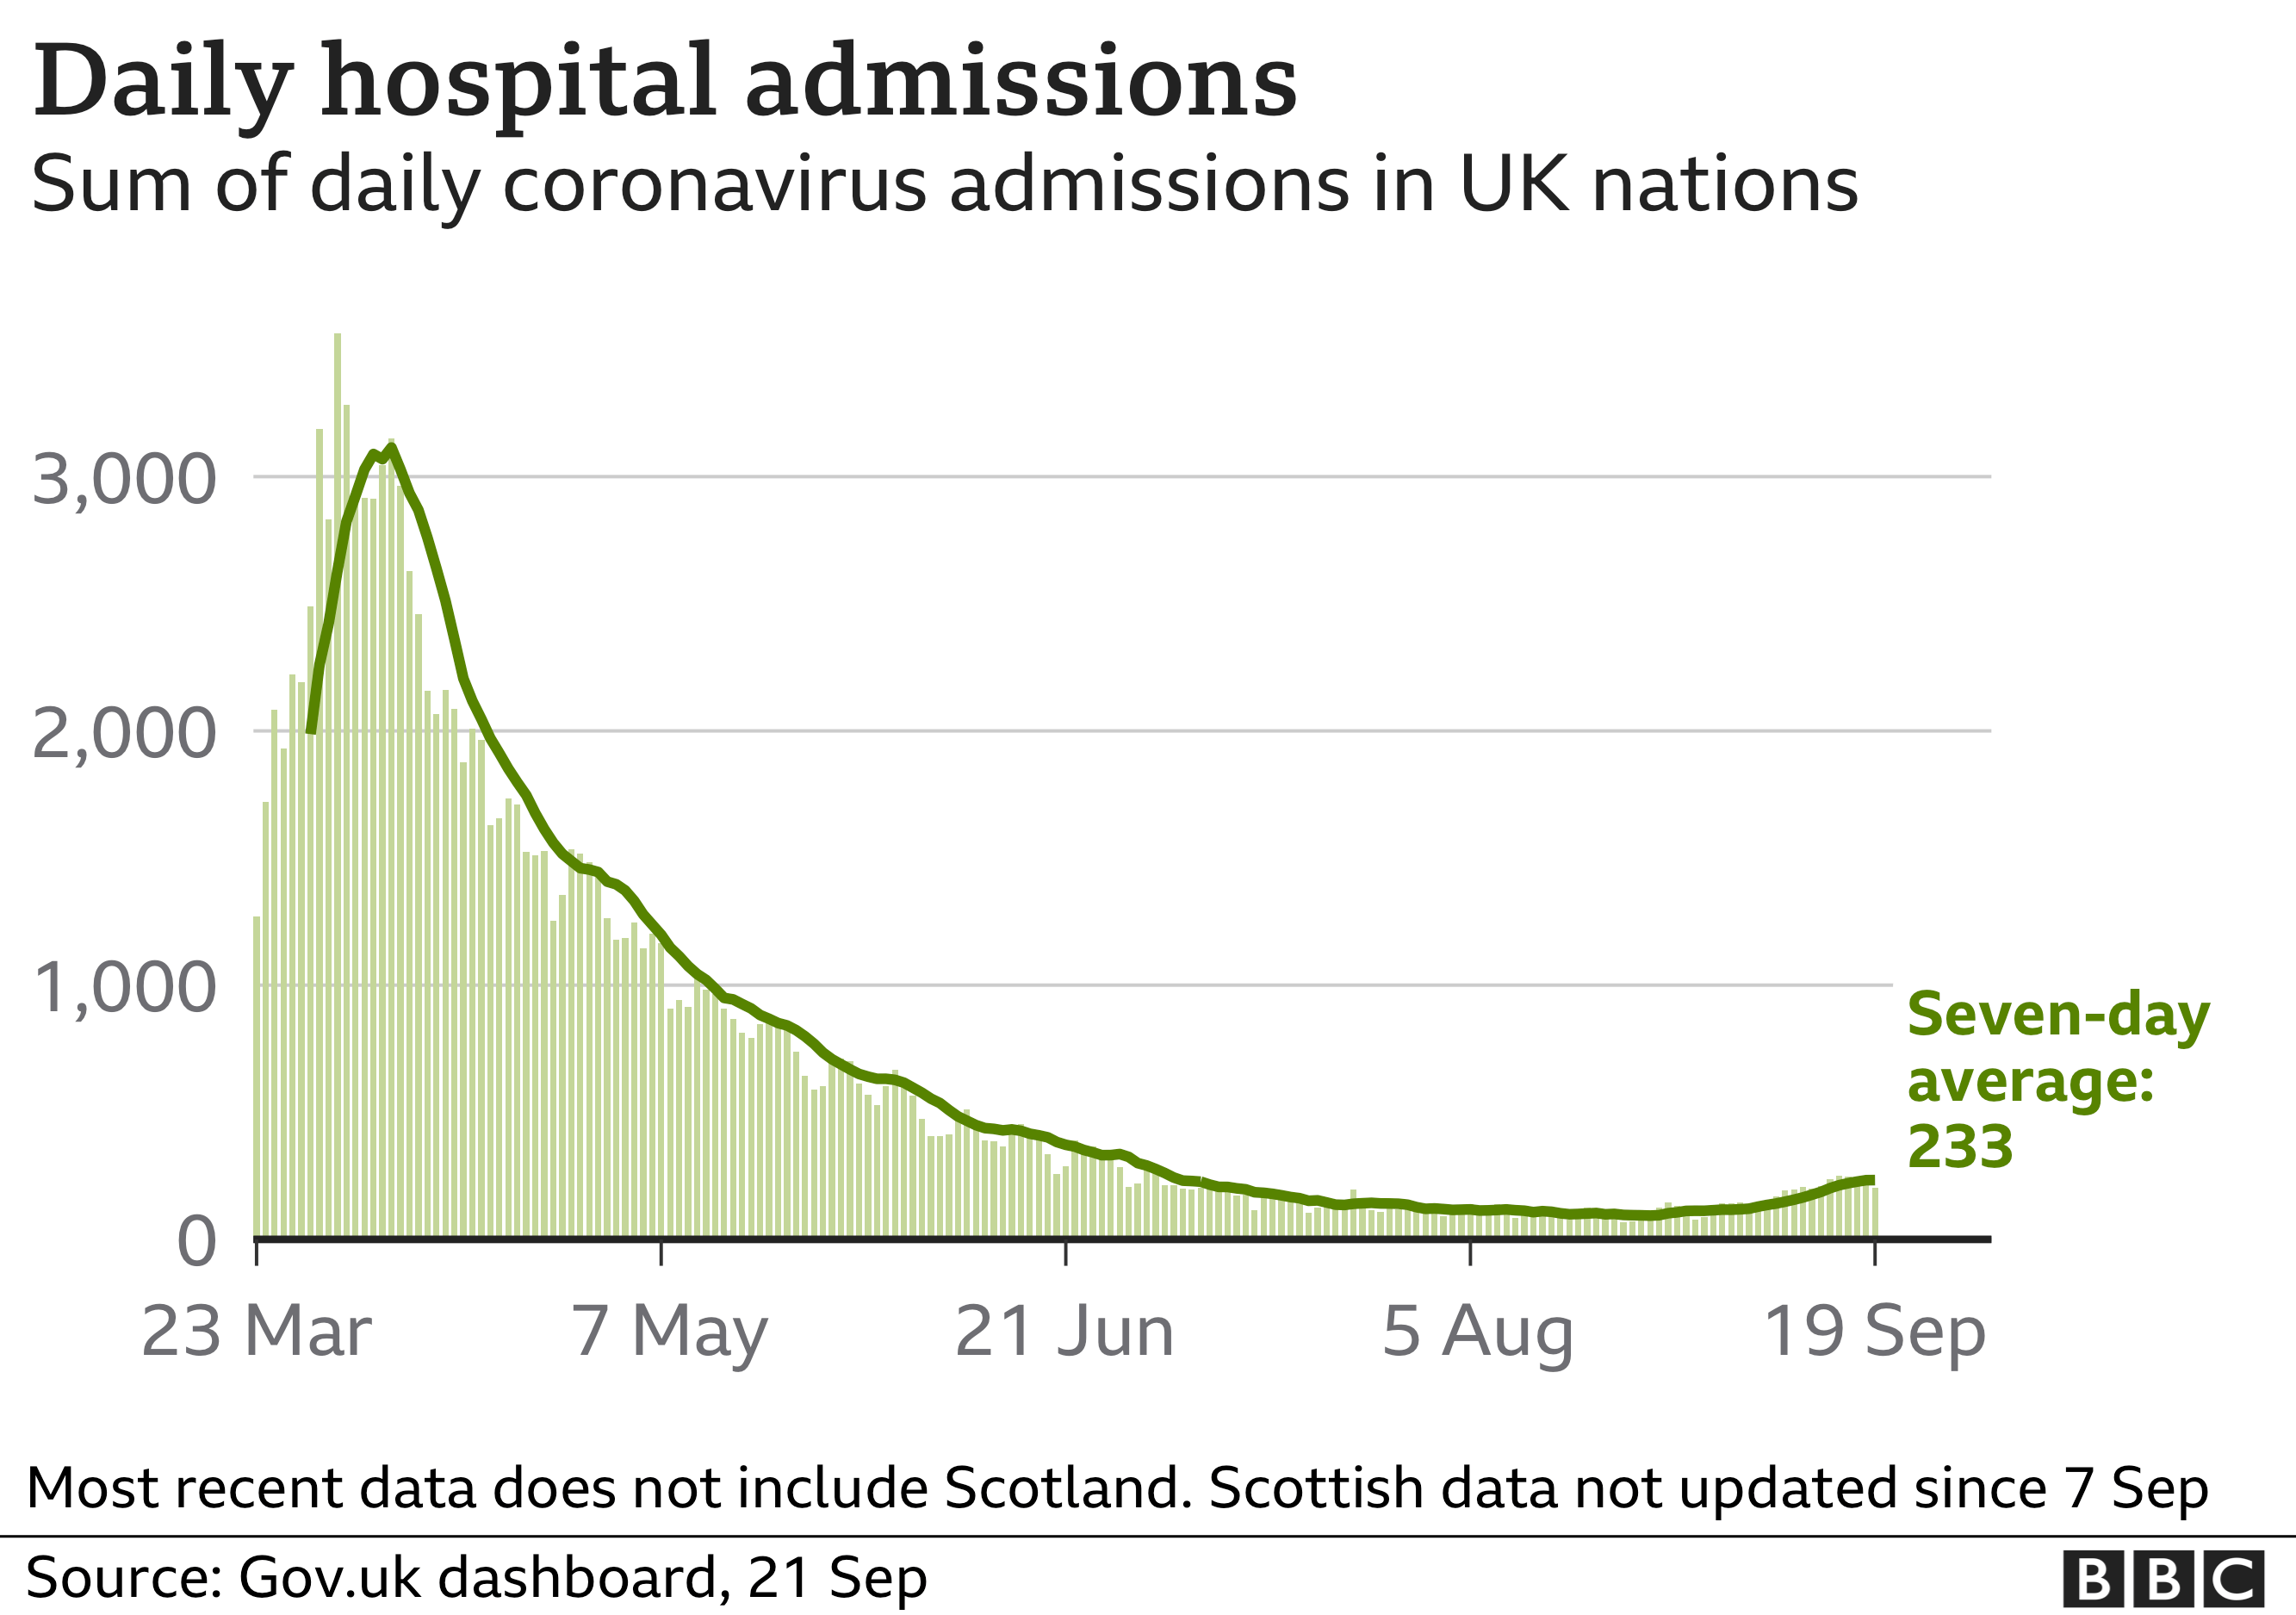 UK daily hospital admissions